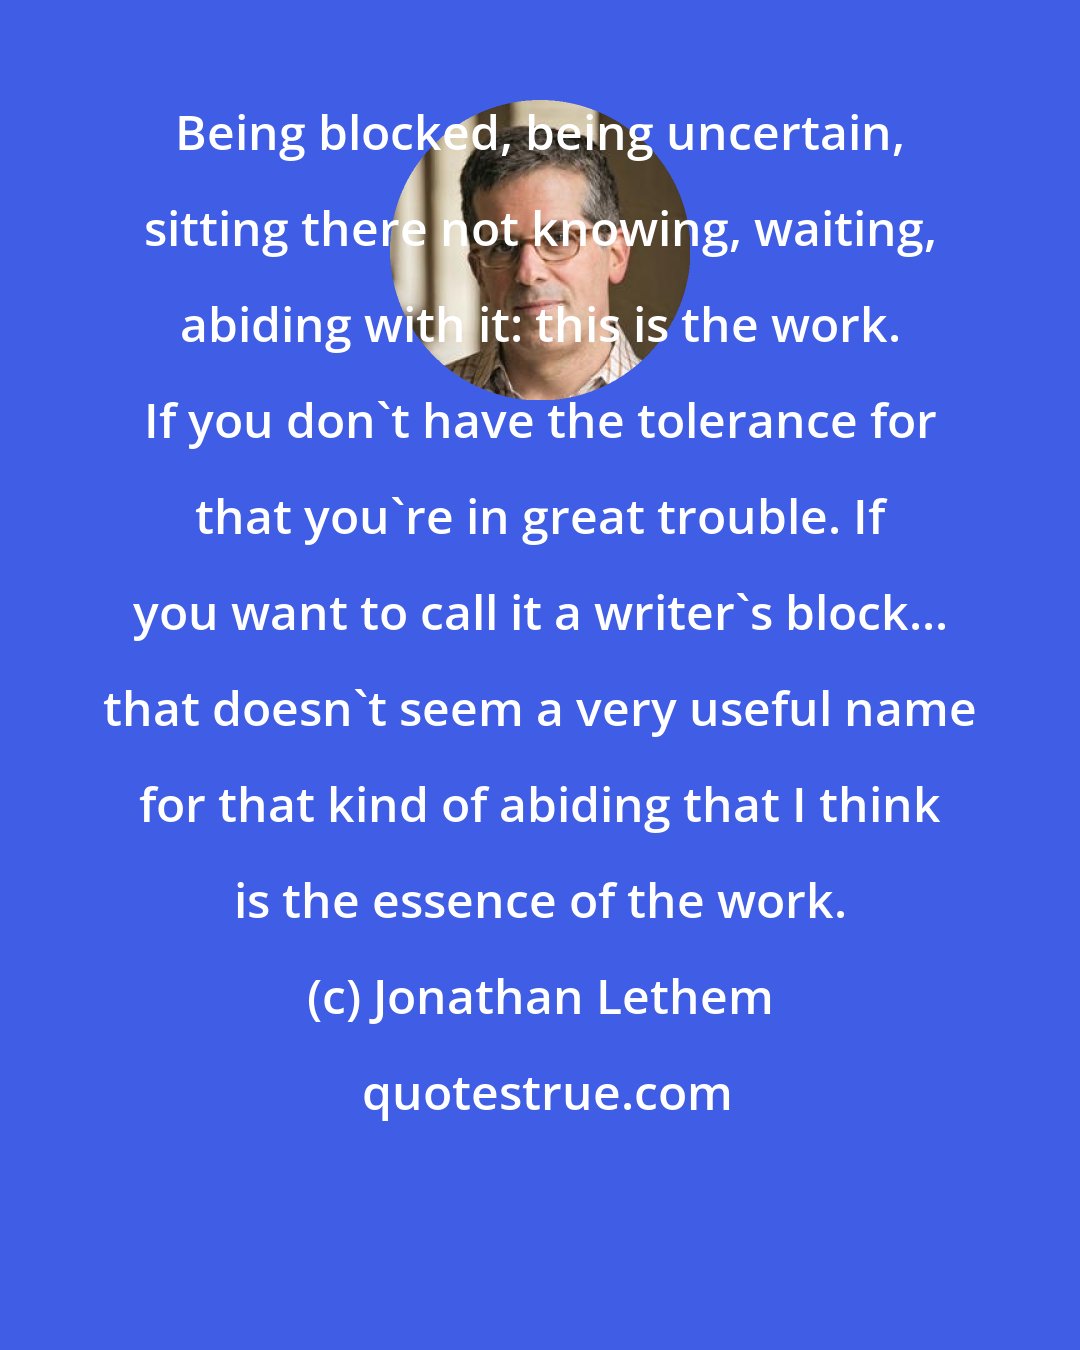 Jonathan Lethem: Being blocked, being uncertain, sitting there not knowing, waiting, abiding with it: this is the work. If you don't have the tolerance for that you're in great trouble. If you want to call it a writer's block... that doesn't seem a very useful name for that kind of abiding that I think is the essence of the work.